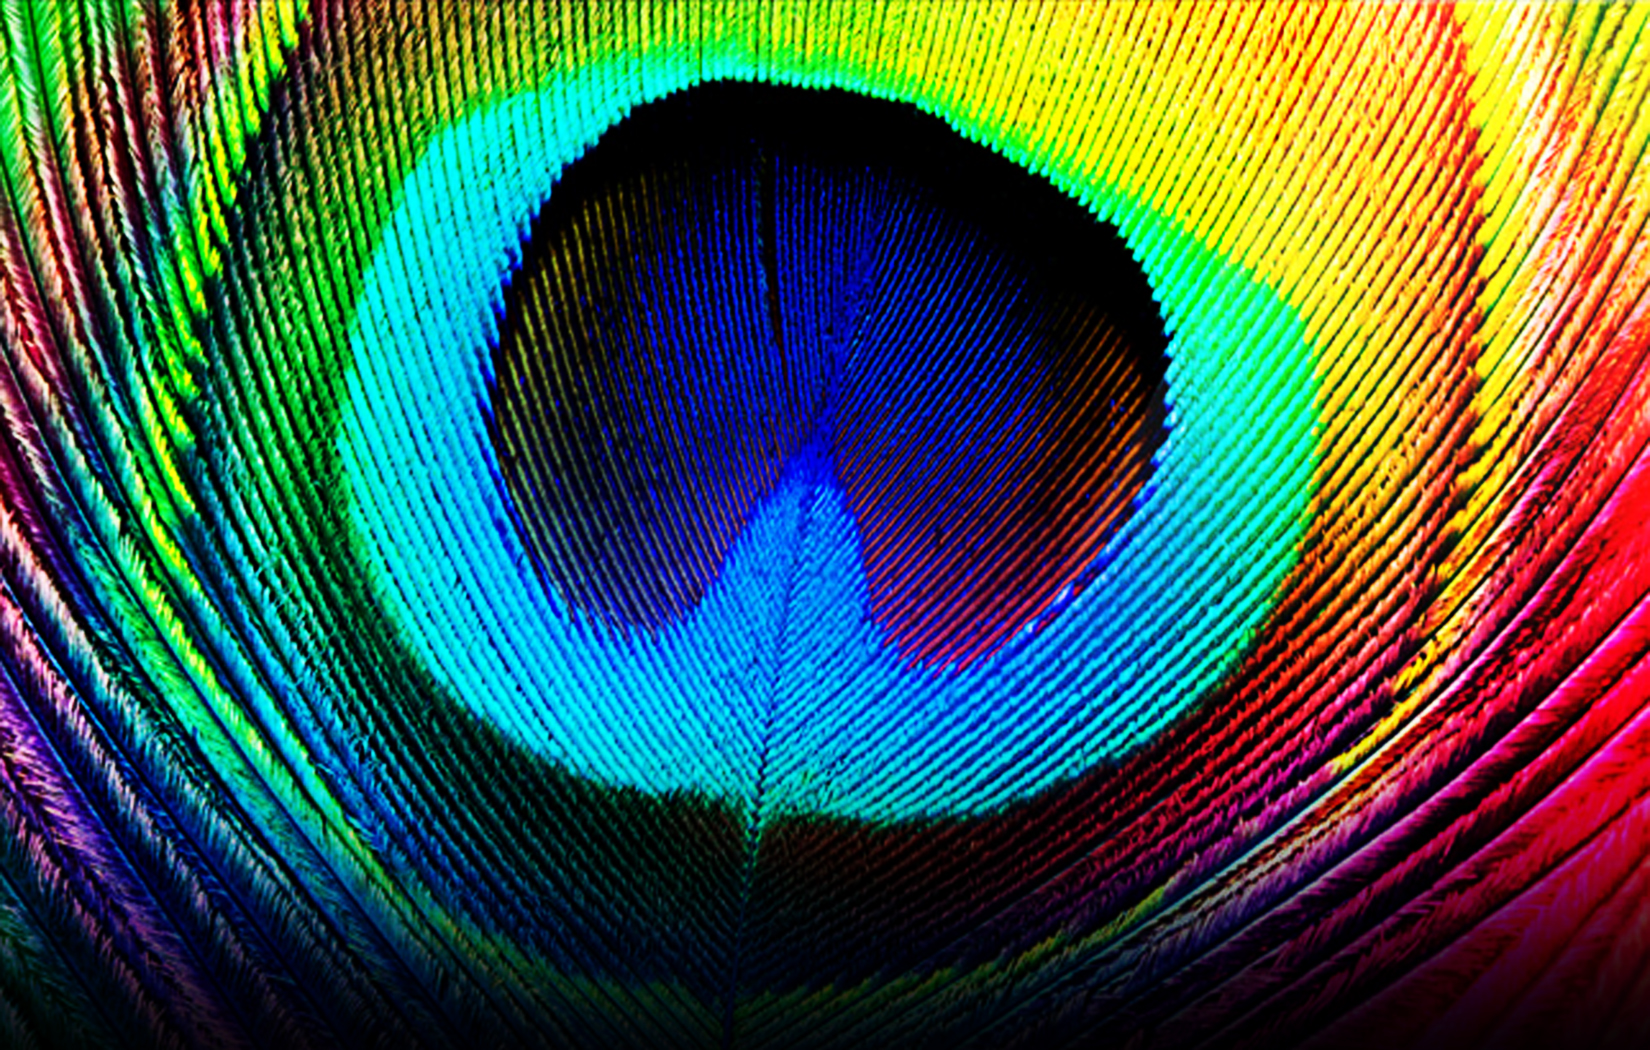 Peacock Feather Image HD Wallpaper Pictures